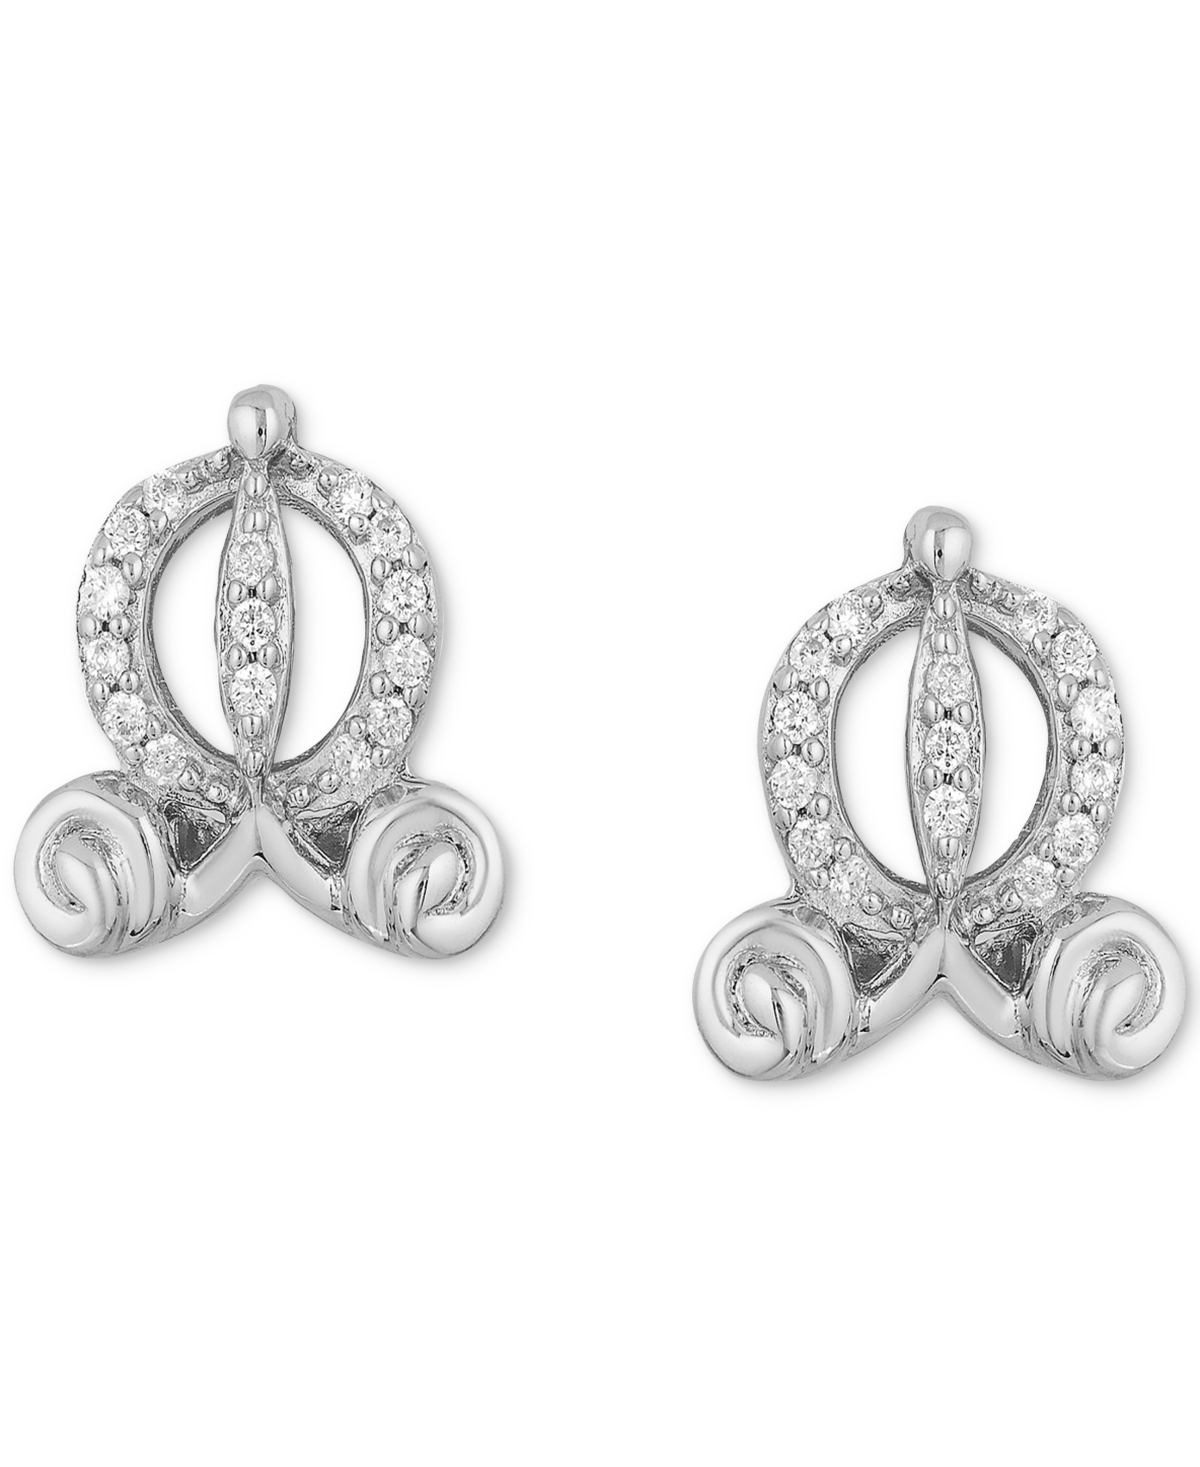 Enchanted Disney Fine Jewelry Diamond Accent Cinderella Carriage Stud Earrings In Sterling Silver